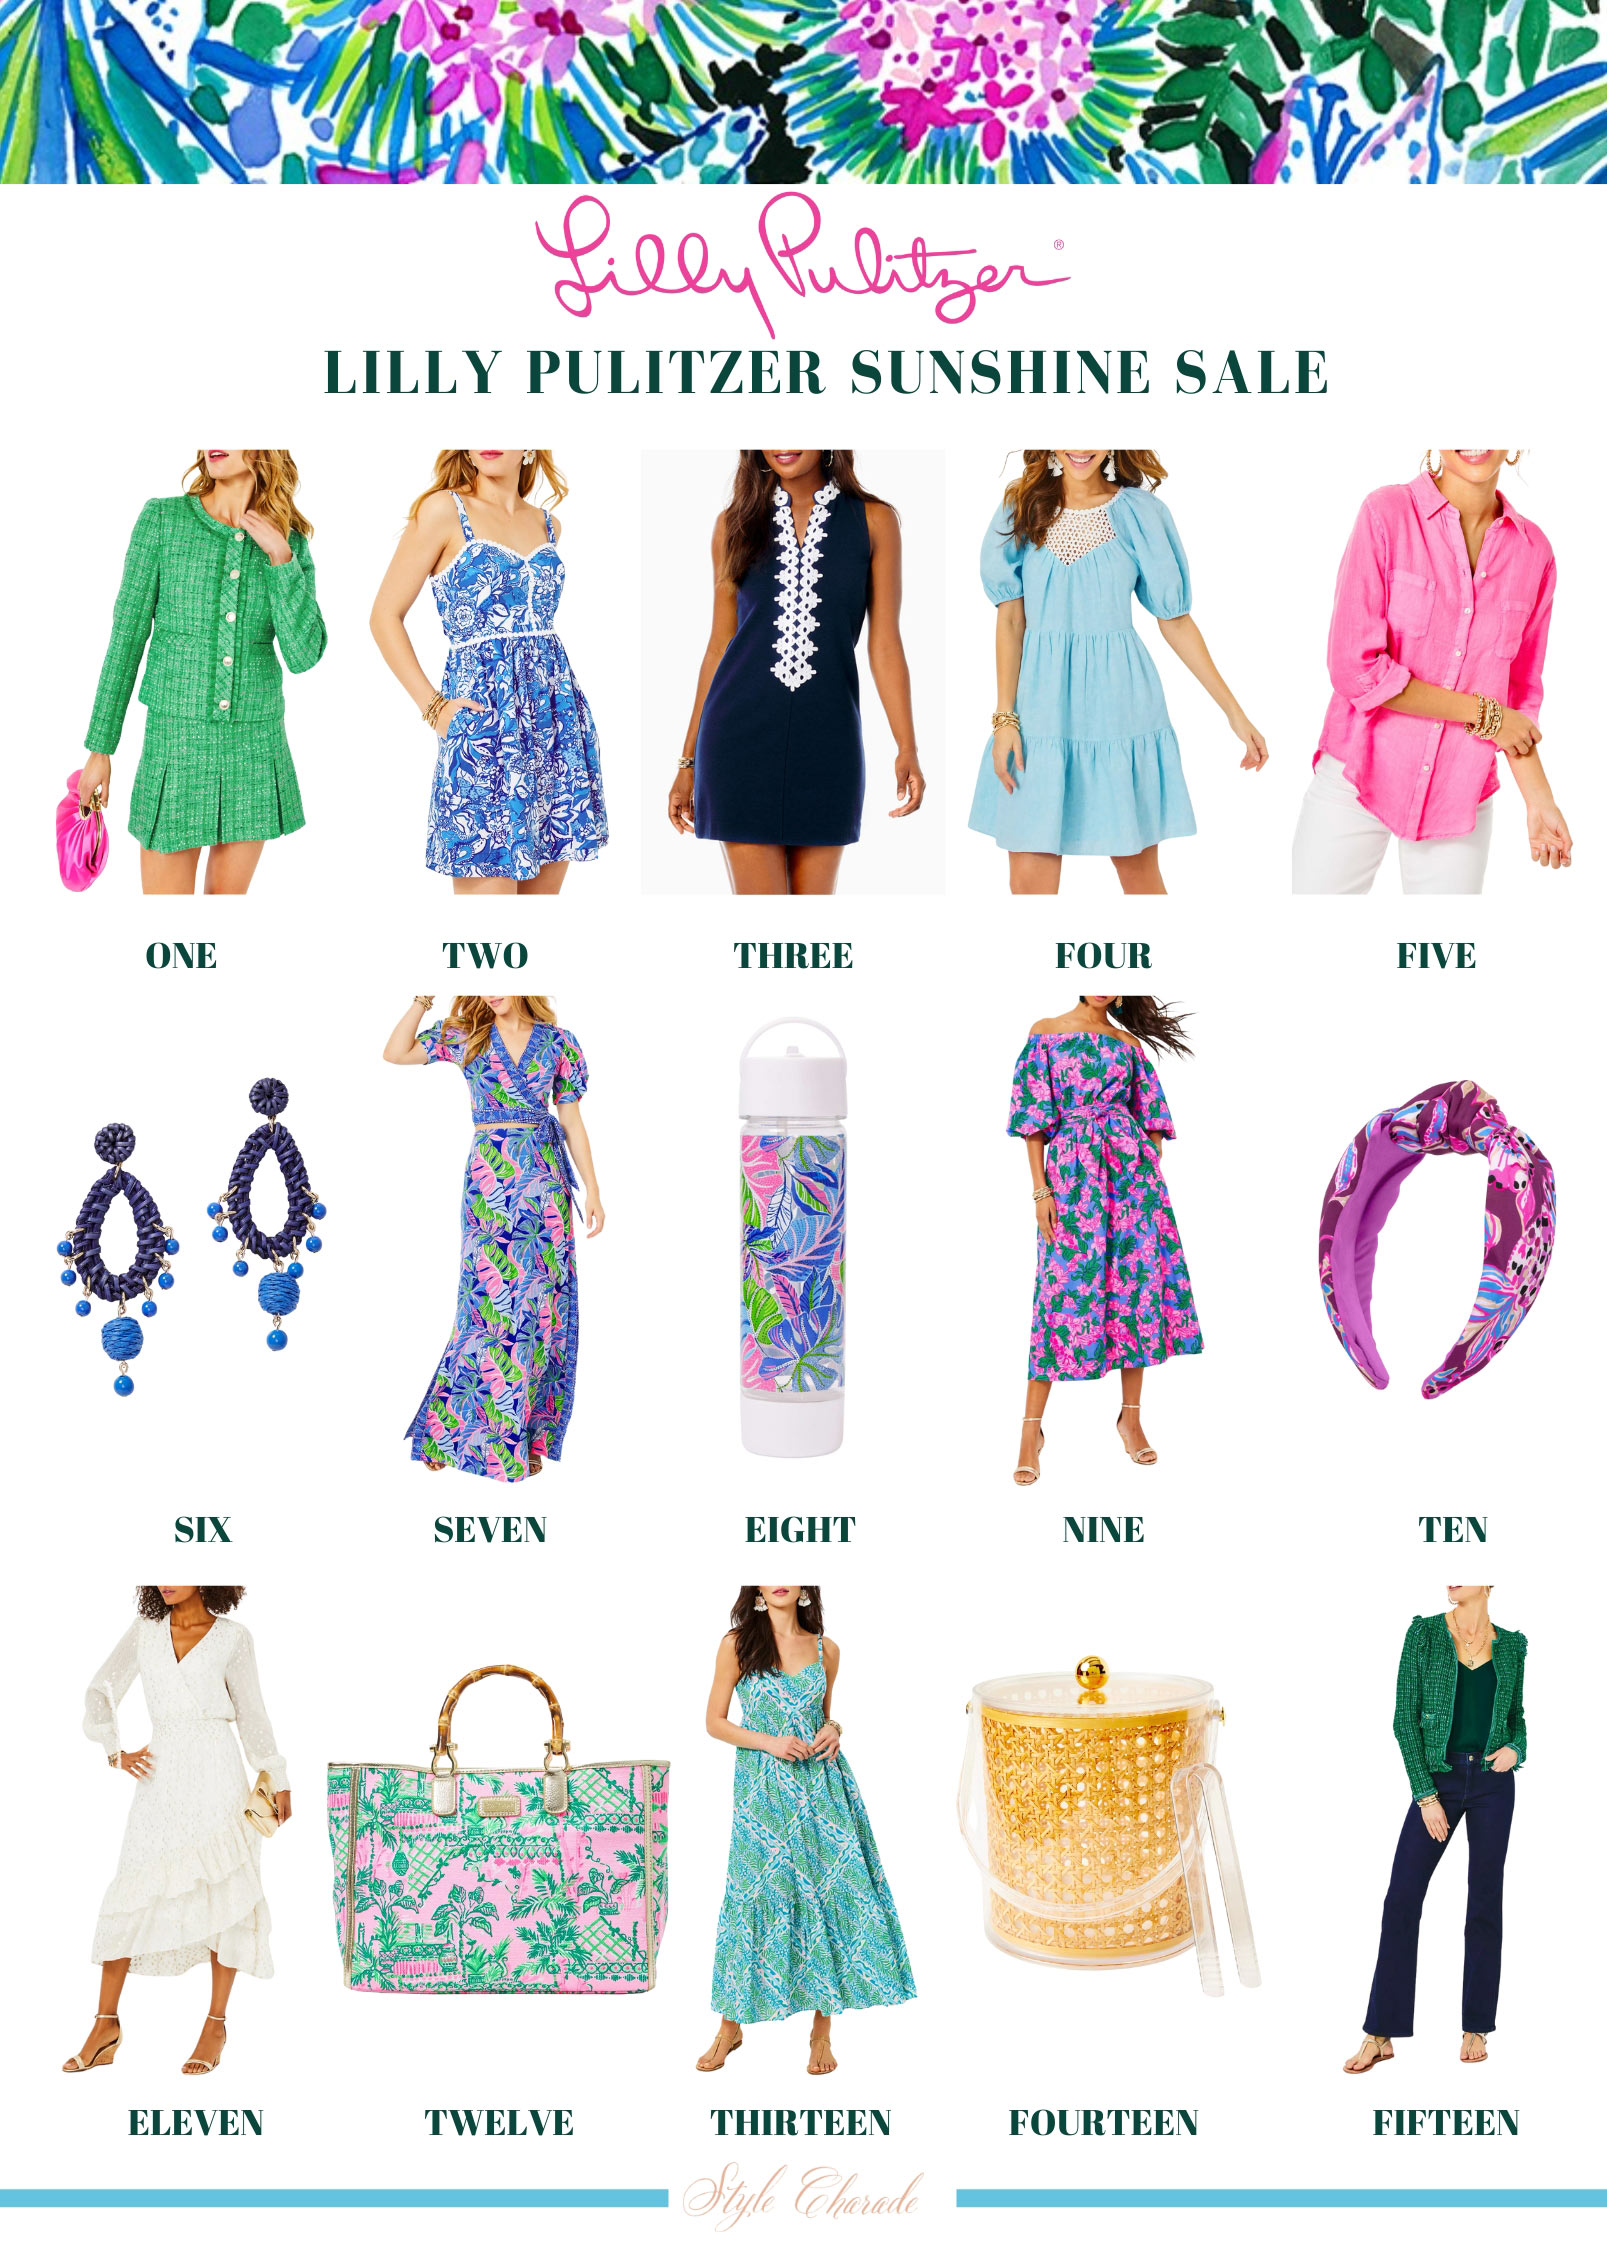 Lilly Pulitzer After Party Sale